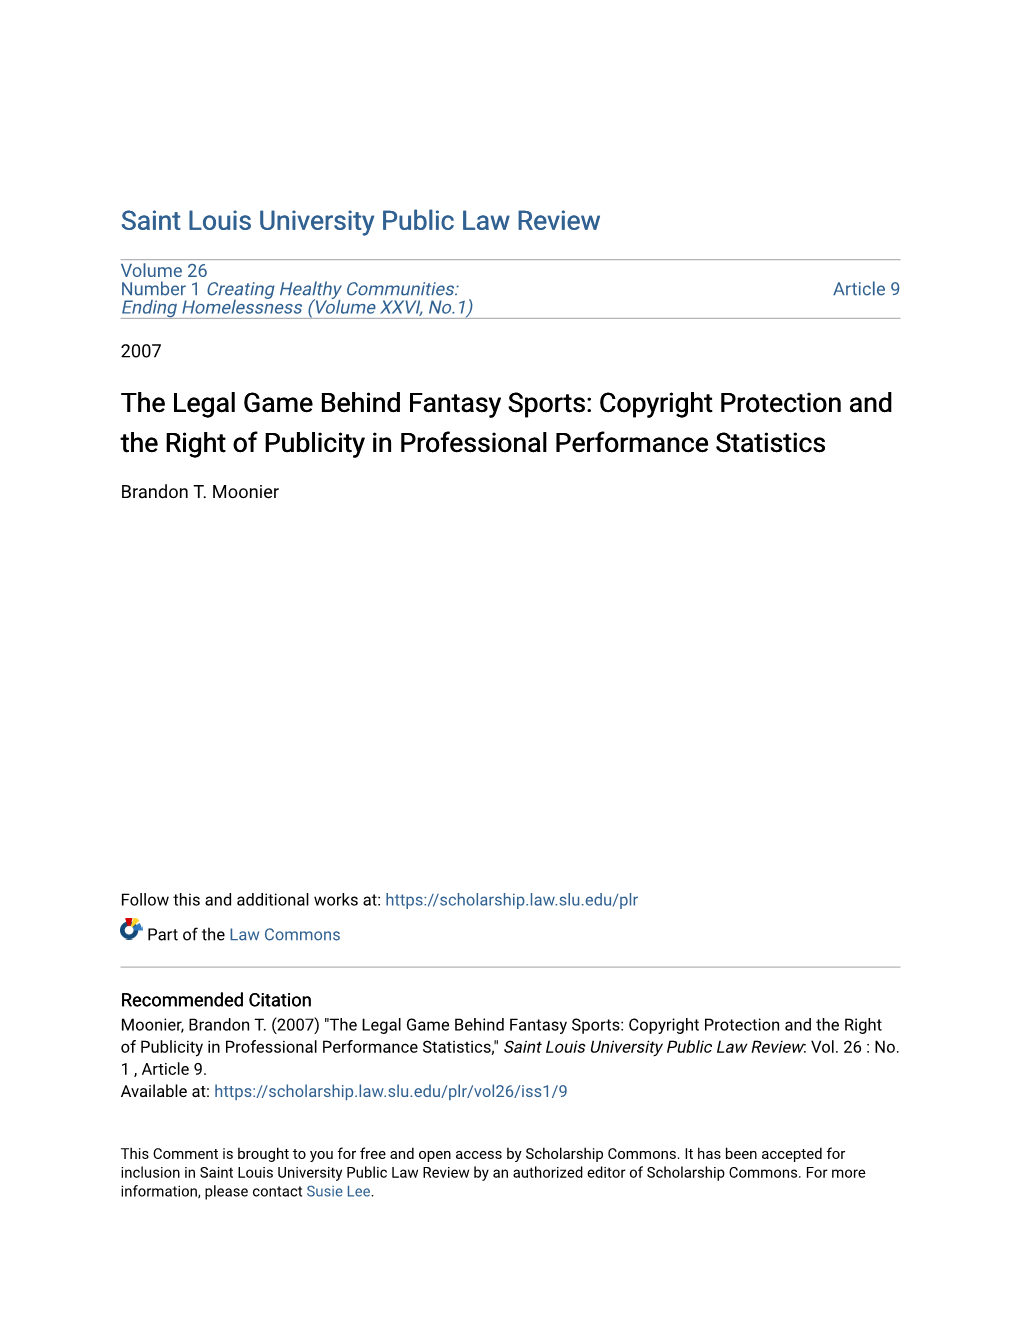 The Legal Game Behind Fantasy Sports: Copyright Protection and the Right of Publicity in Professional Performance Statistics